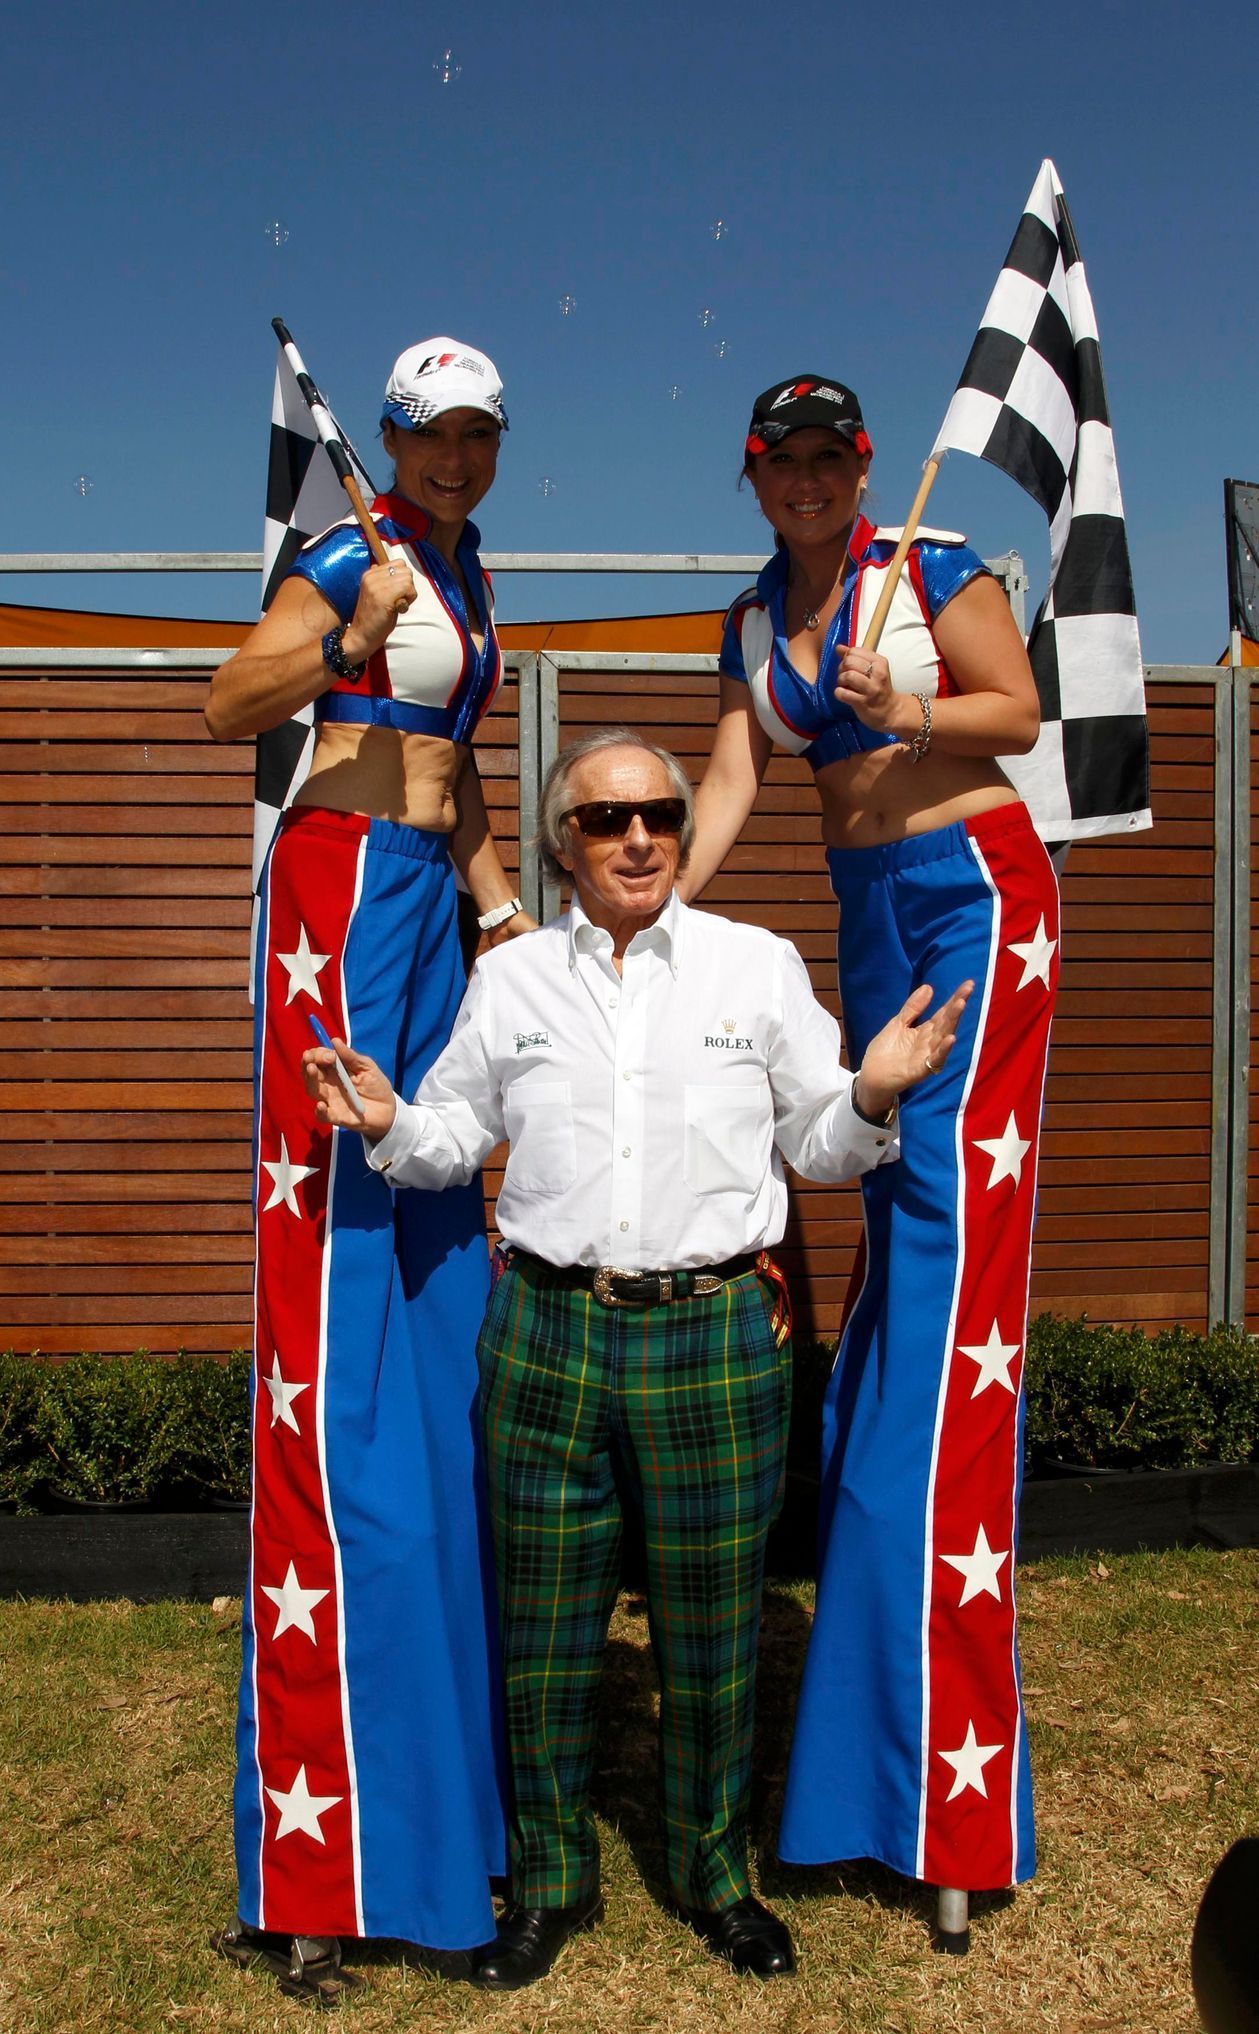 Formula One racing legend Stewart attends the first practice session of the Australian F1 Grand Prix in Melbourne